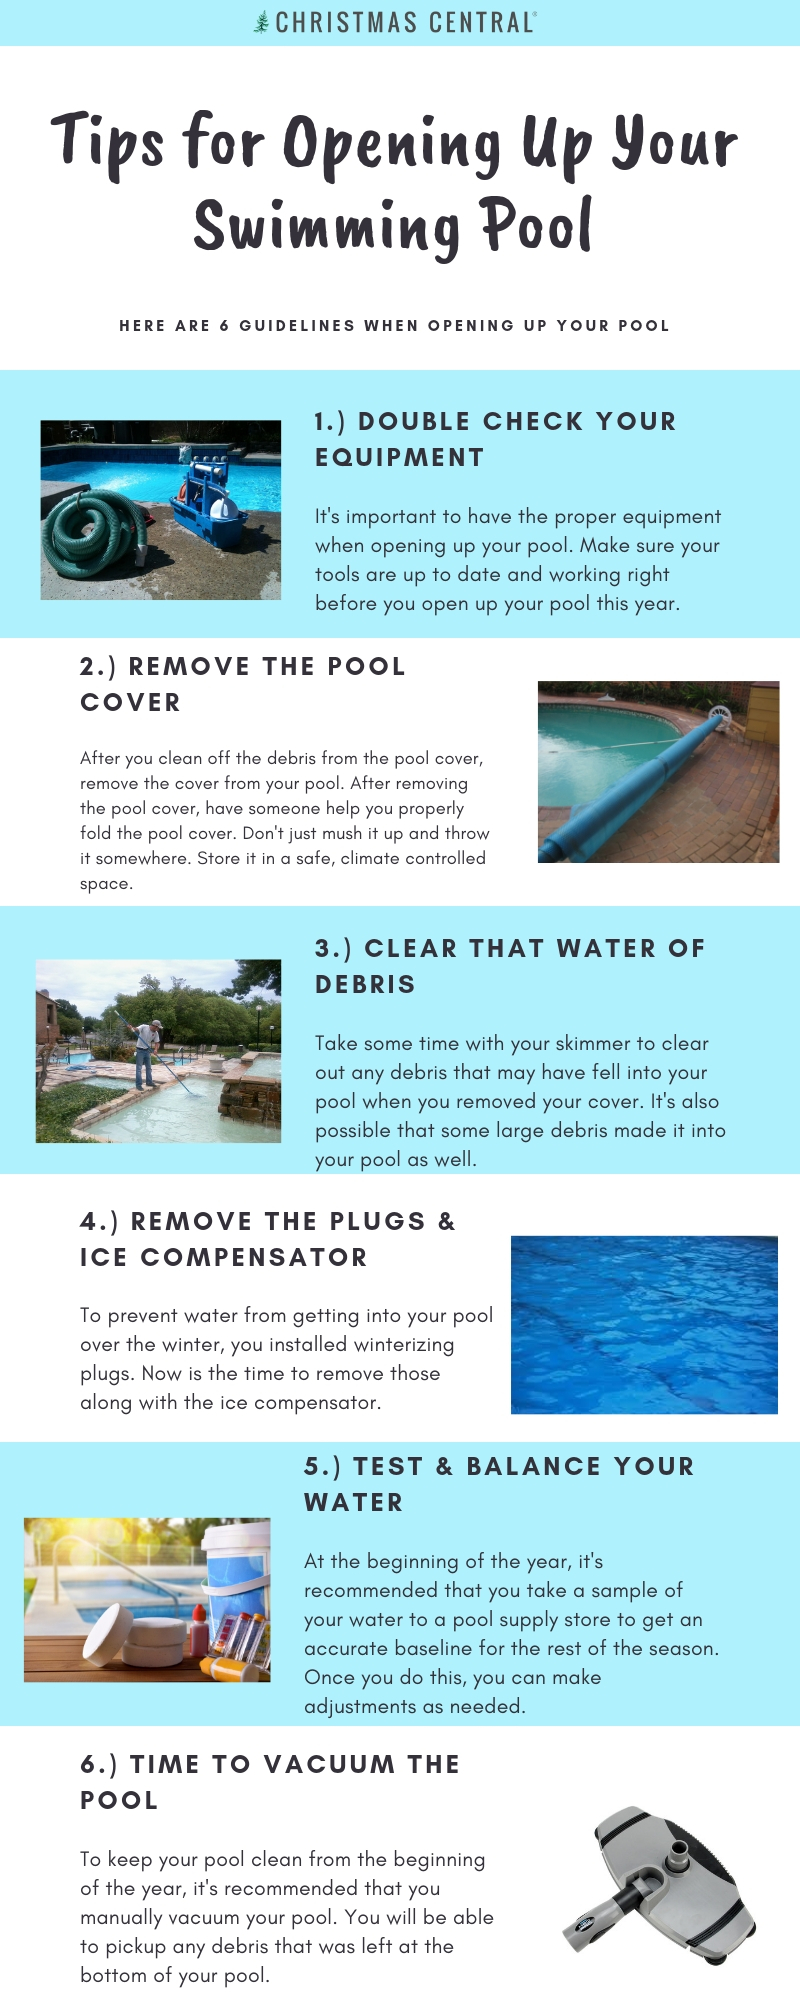 Swimming Pool Opening Tips & Resources